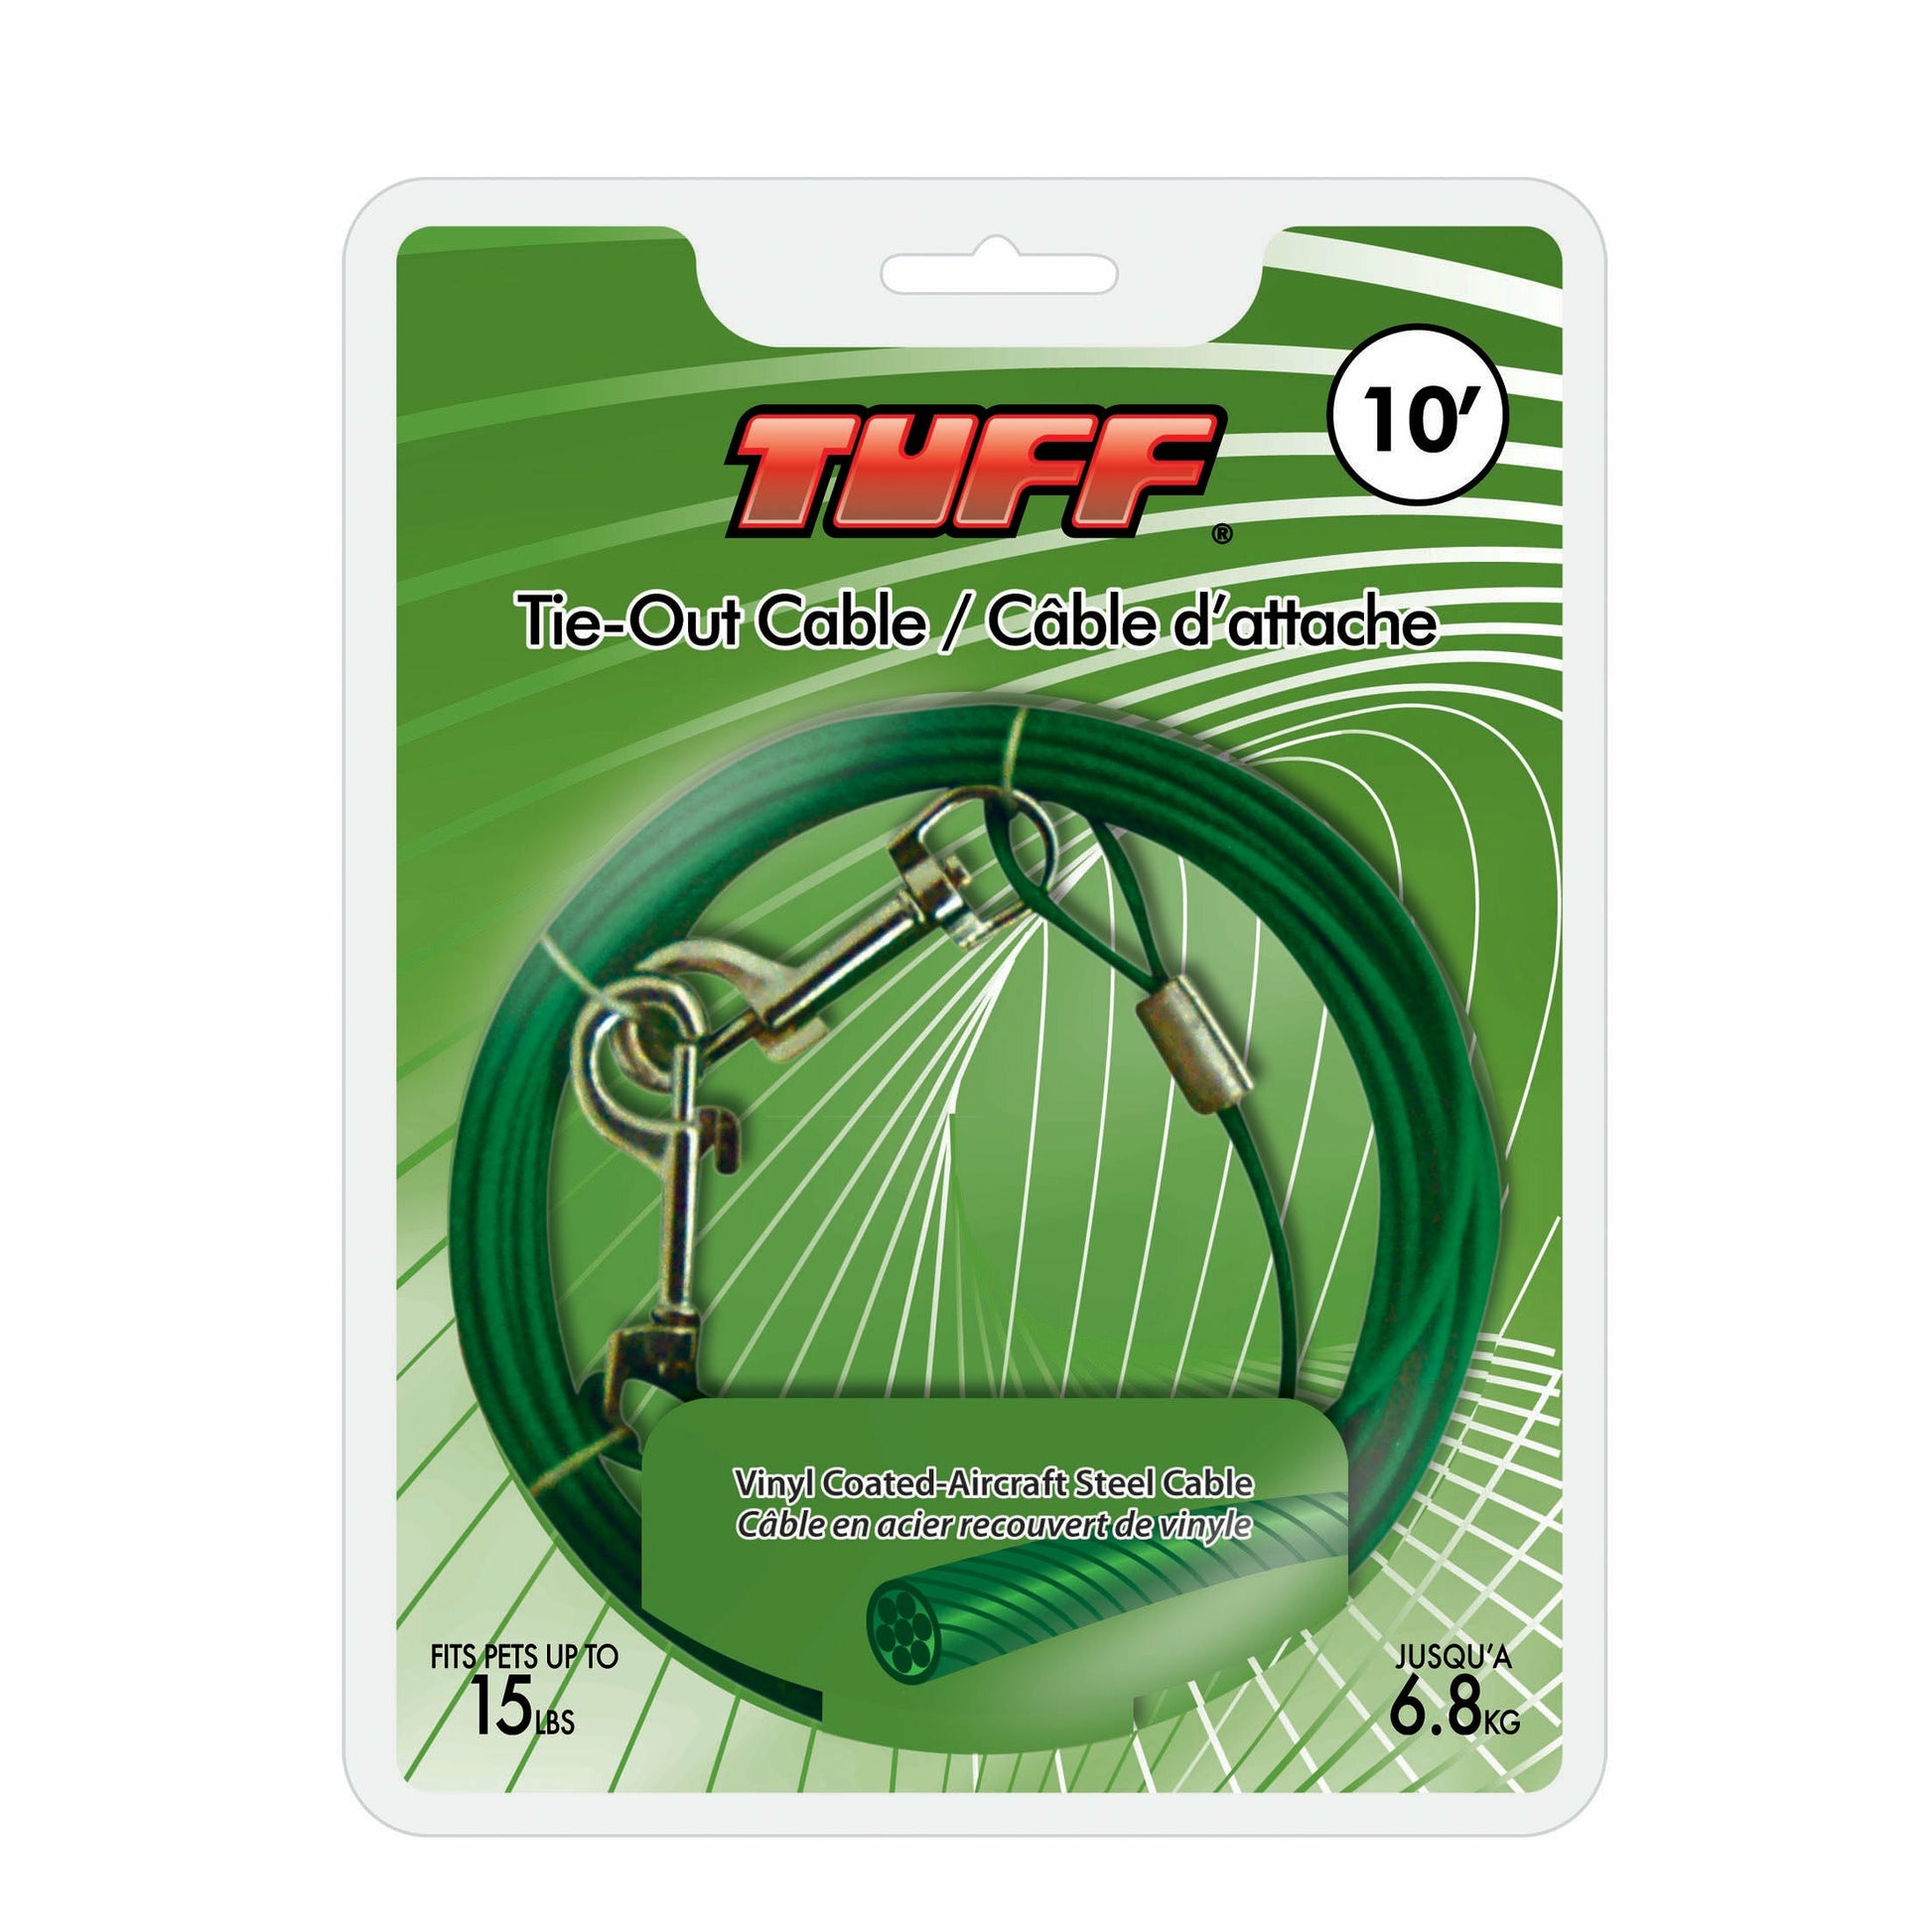 Tuff Tie Out Cable Tiny 10' Tie Outs 10' | PetMax Canada